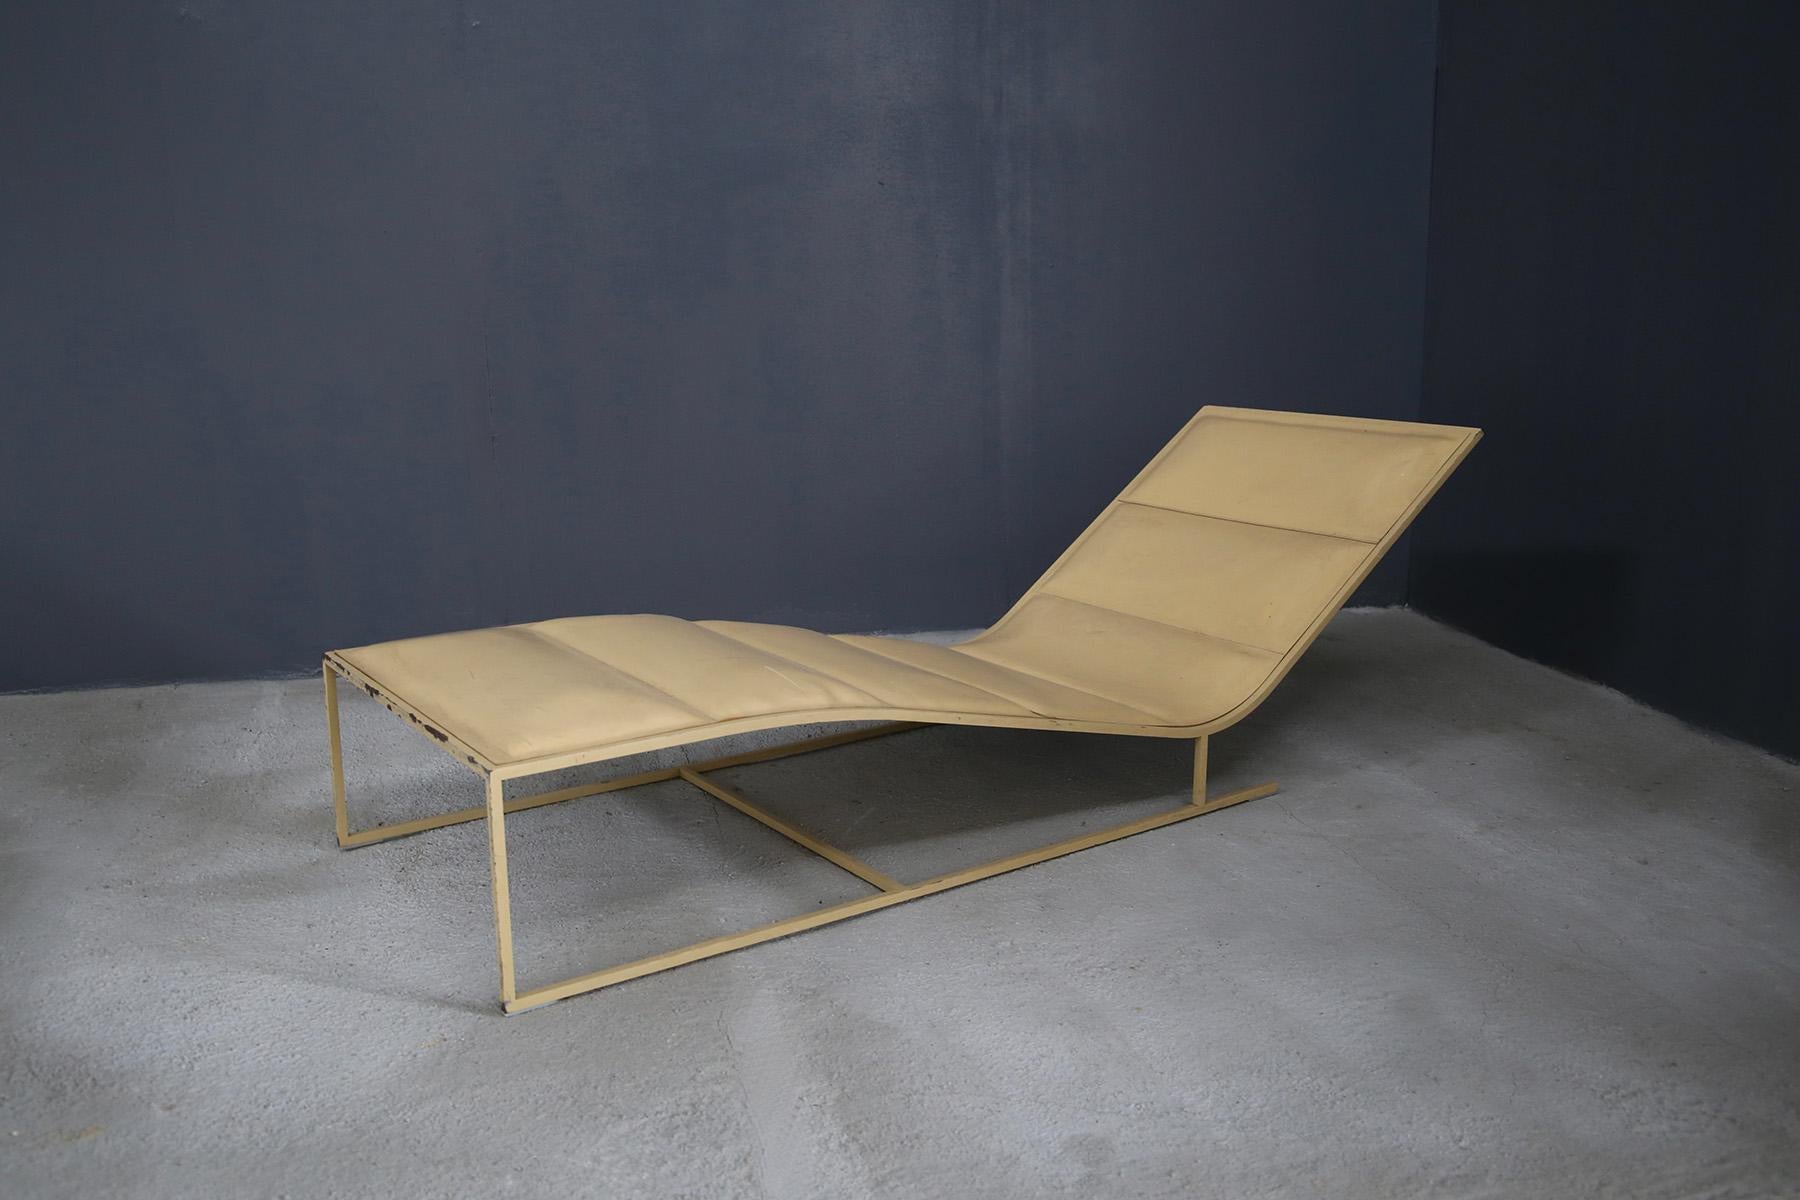 Chaise Lounge Midcentury French Manufacture in Iron and Skin Form, 1950s (Moderne der Mitte des Jahrhunderts)